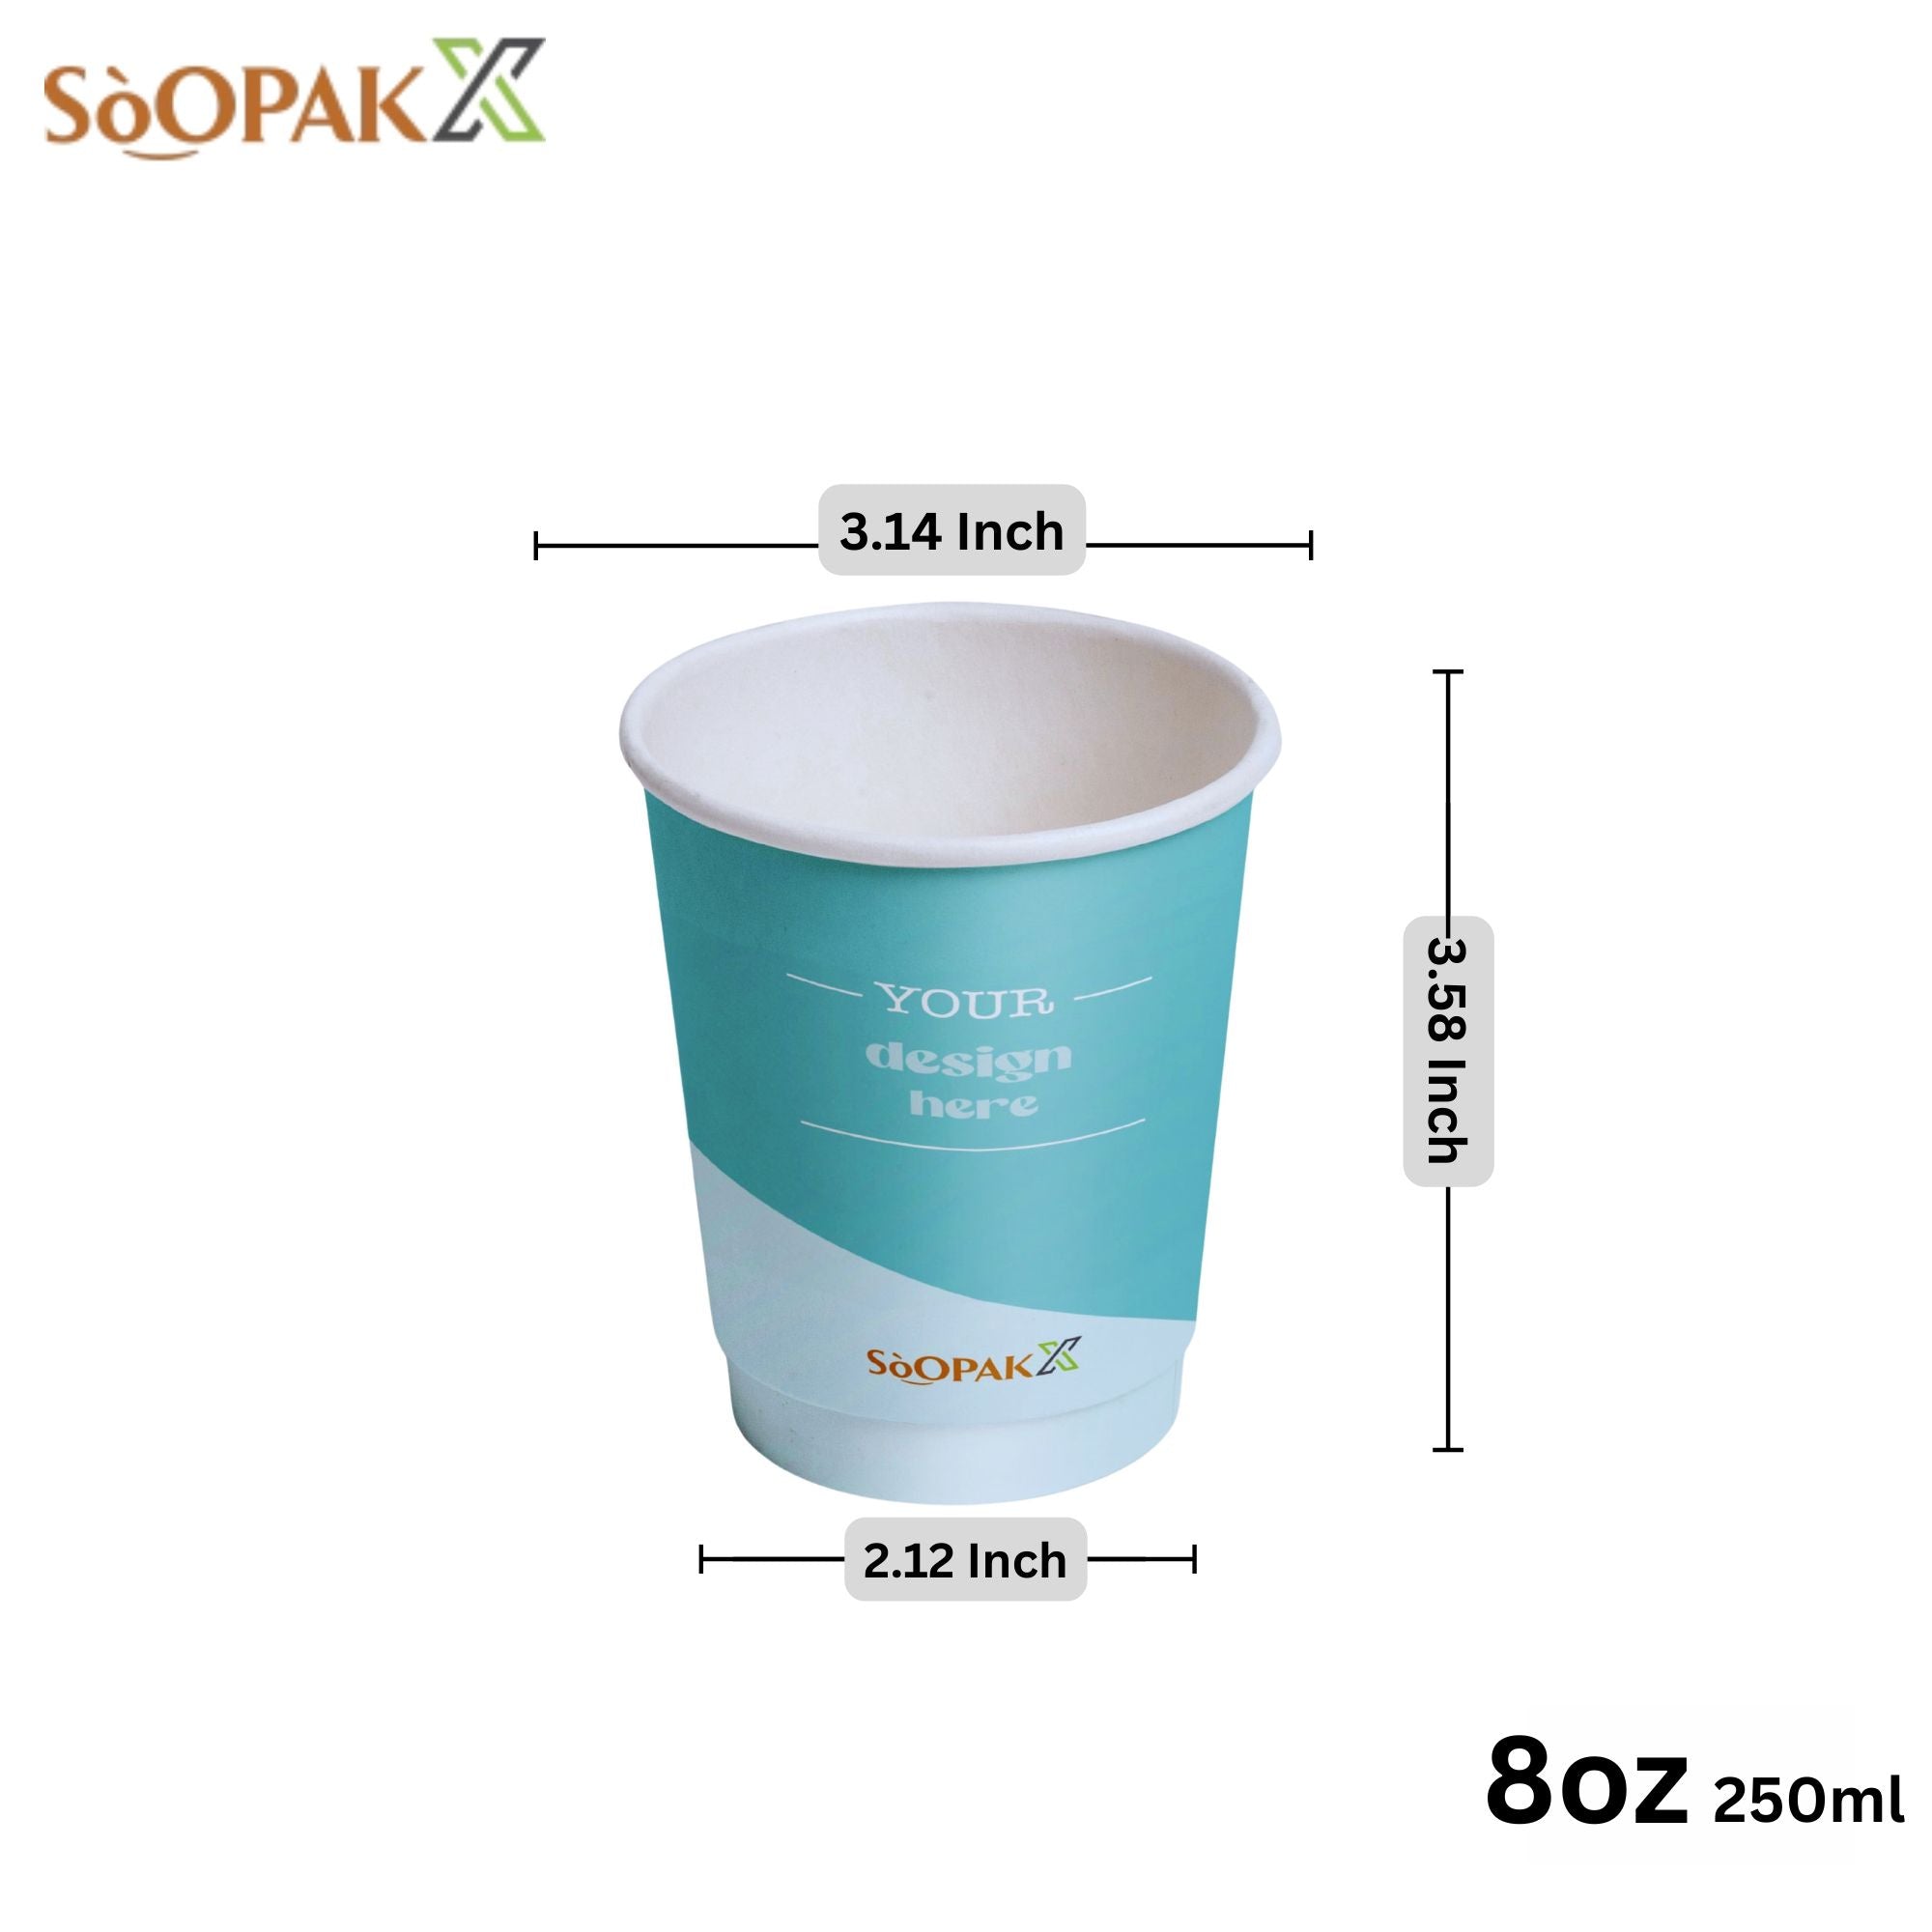 Custom Double-Walled Coffee Cups, avoid leaks, durable, warming, biodegradable, freshness, takeout, Packaging, easy visibility, food safe, avoid leaks, high-quality, dinnerware, Ecosmart, sustainable, coffee, tea, epitomize, biodegradable, renewable, hot chocolate, morning coffee, double-walled cups, freshness, takeout, Packaging, avoid spills, food safe, microwavable, elegance, dinnerware, strong, resilient, avoid leaks, restaurants, perfect choice, bulk pack, party cups, Leak Resistant